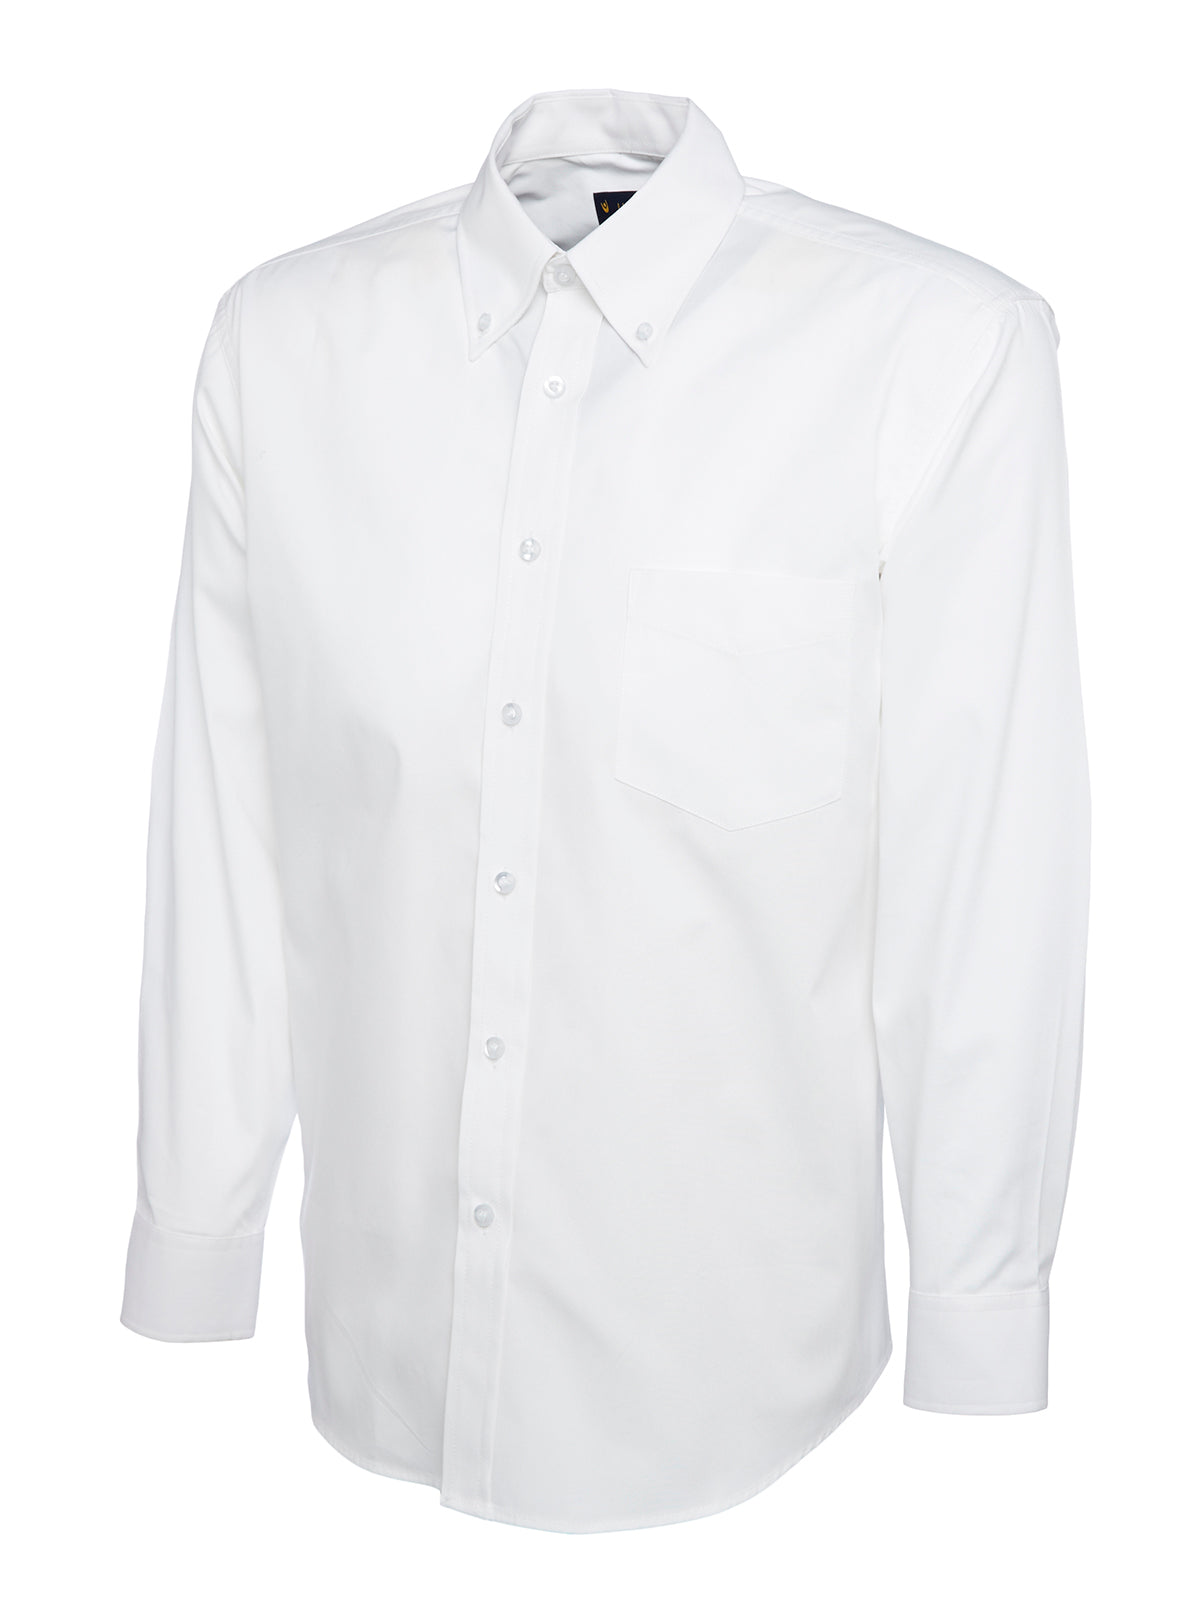 Uneek Mens Pinpoint Oxford Full Sleeve Shirt UC701 - White